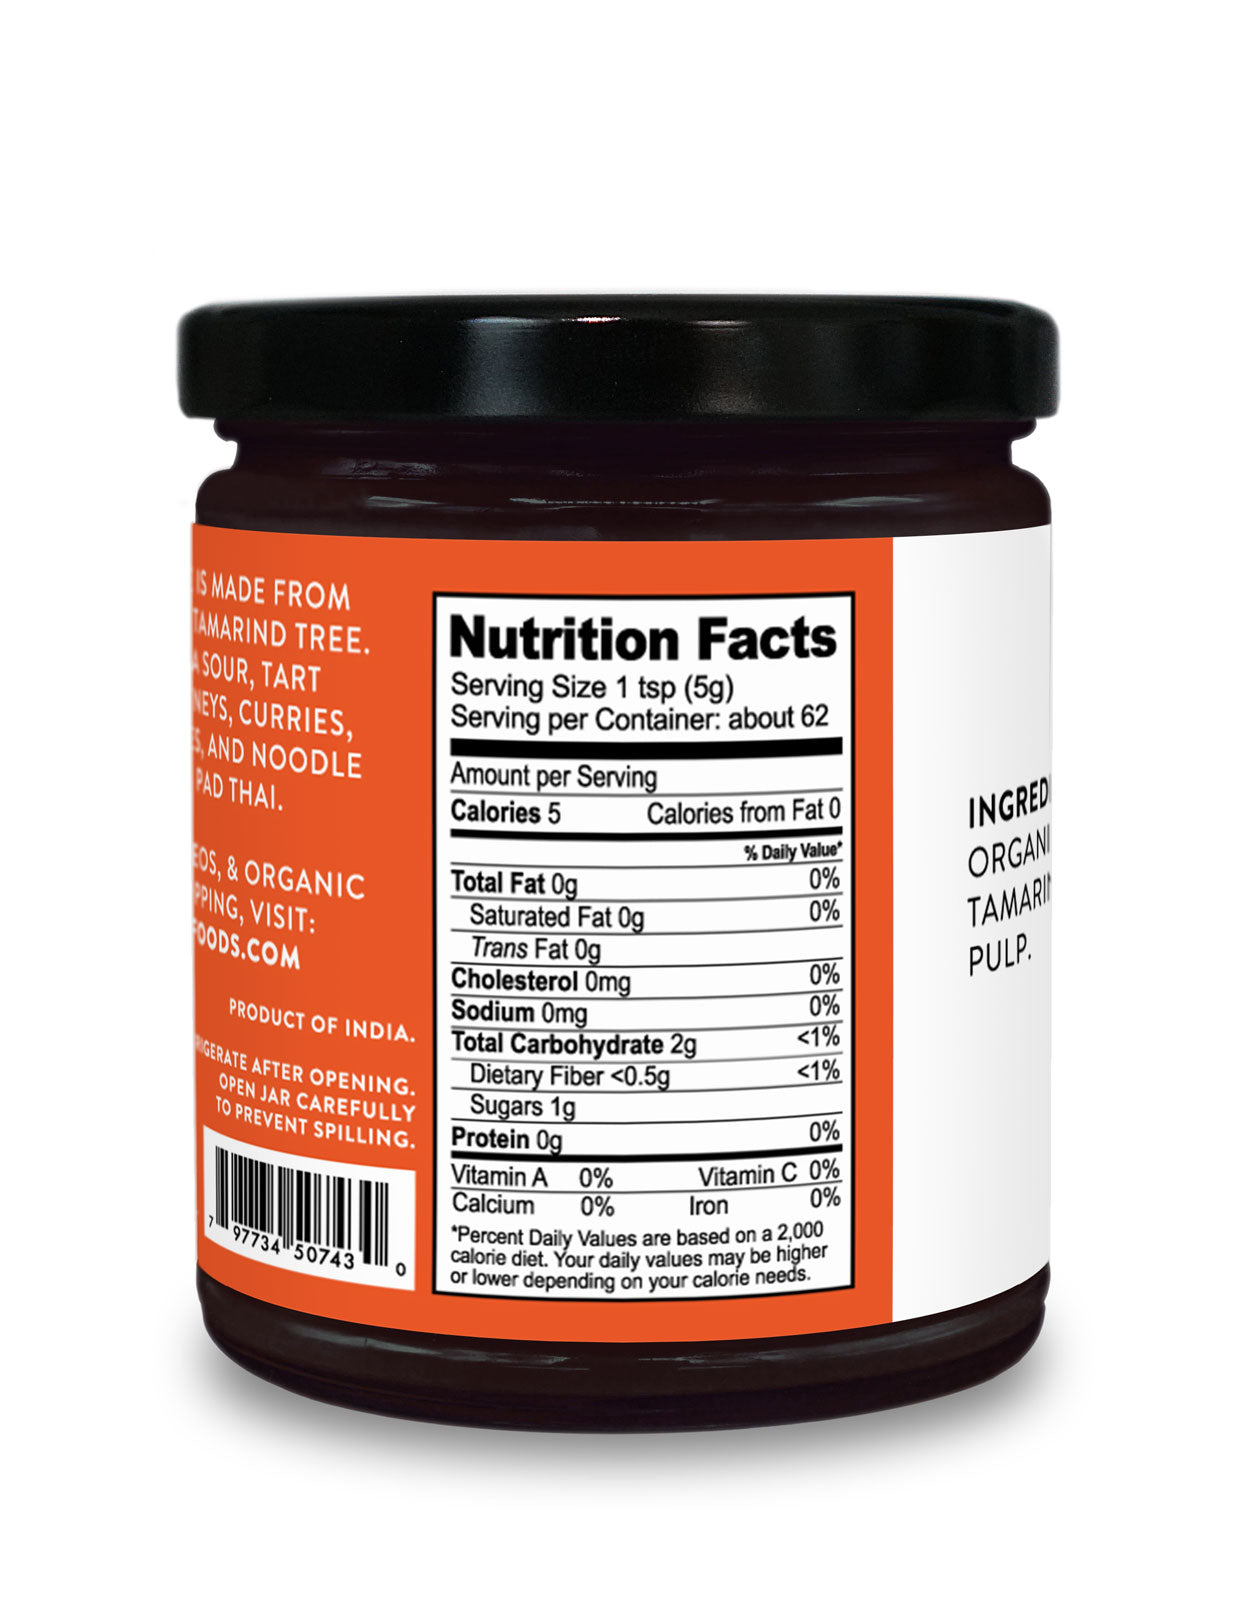 Nutrition Facts Label on a jar of Organic Tamarind Paste by Pure Indian Foods